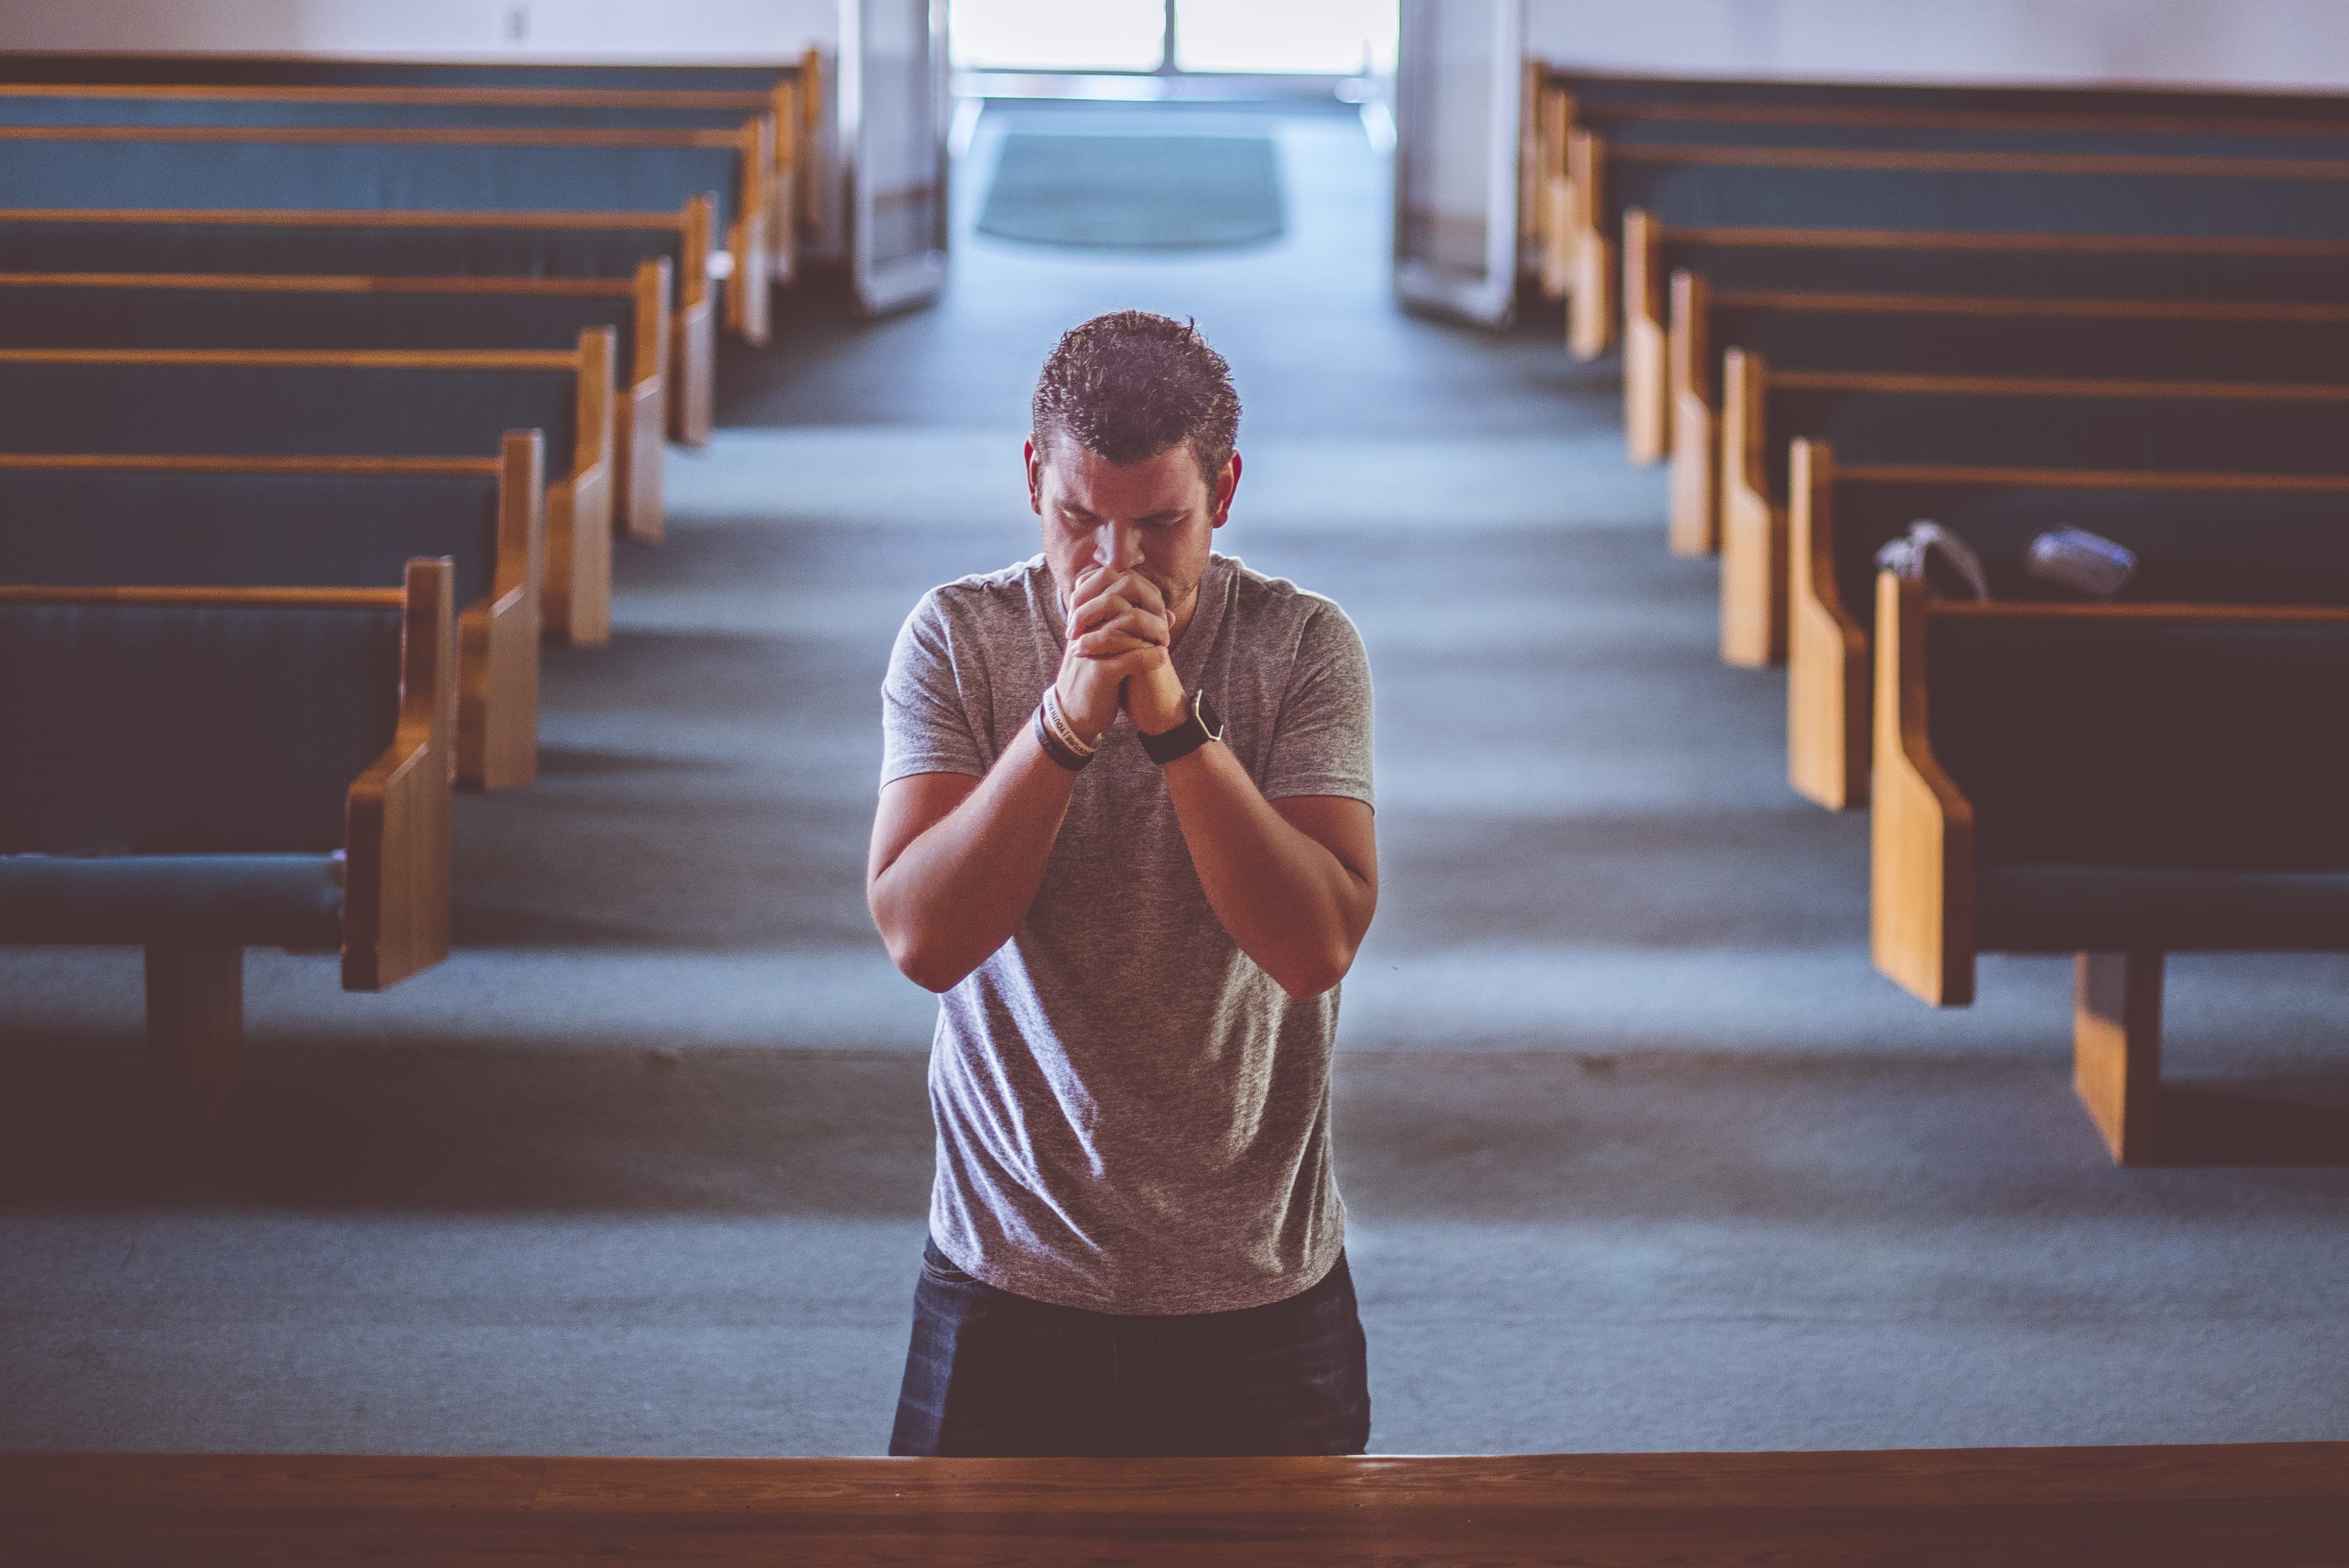 A man praying in a church., one person, casual clothing, indoors